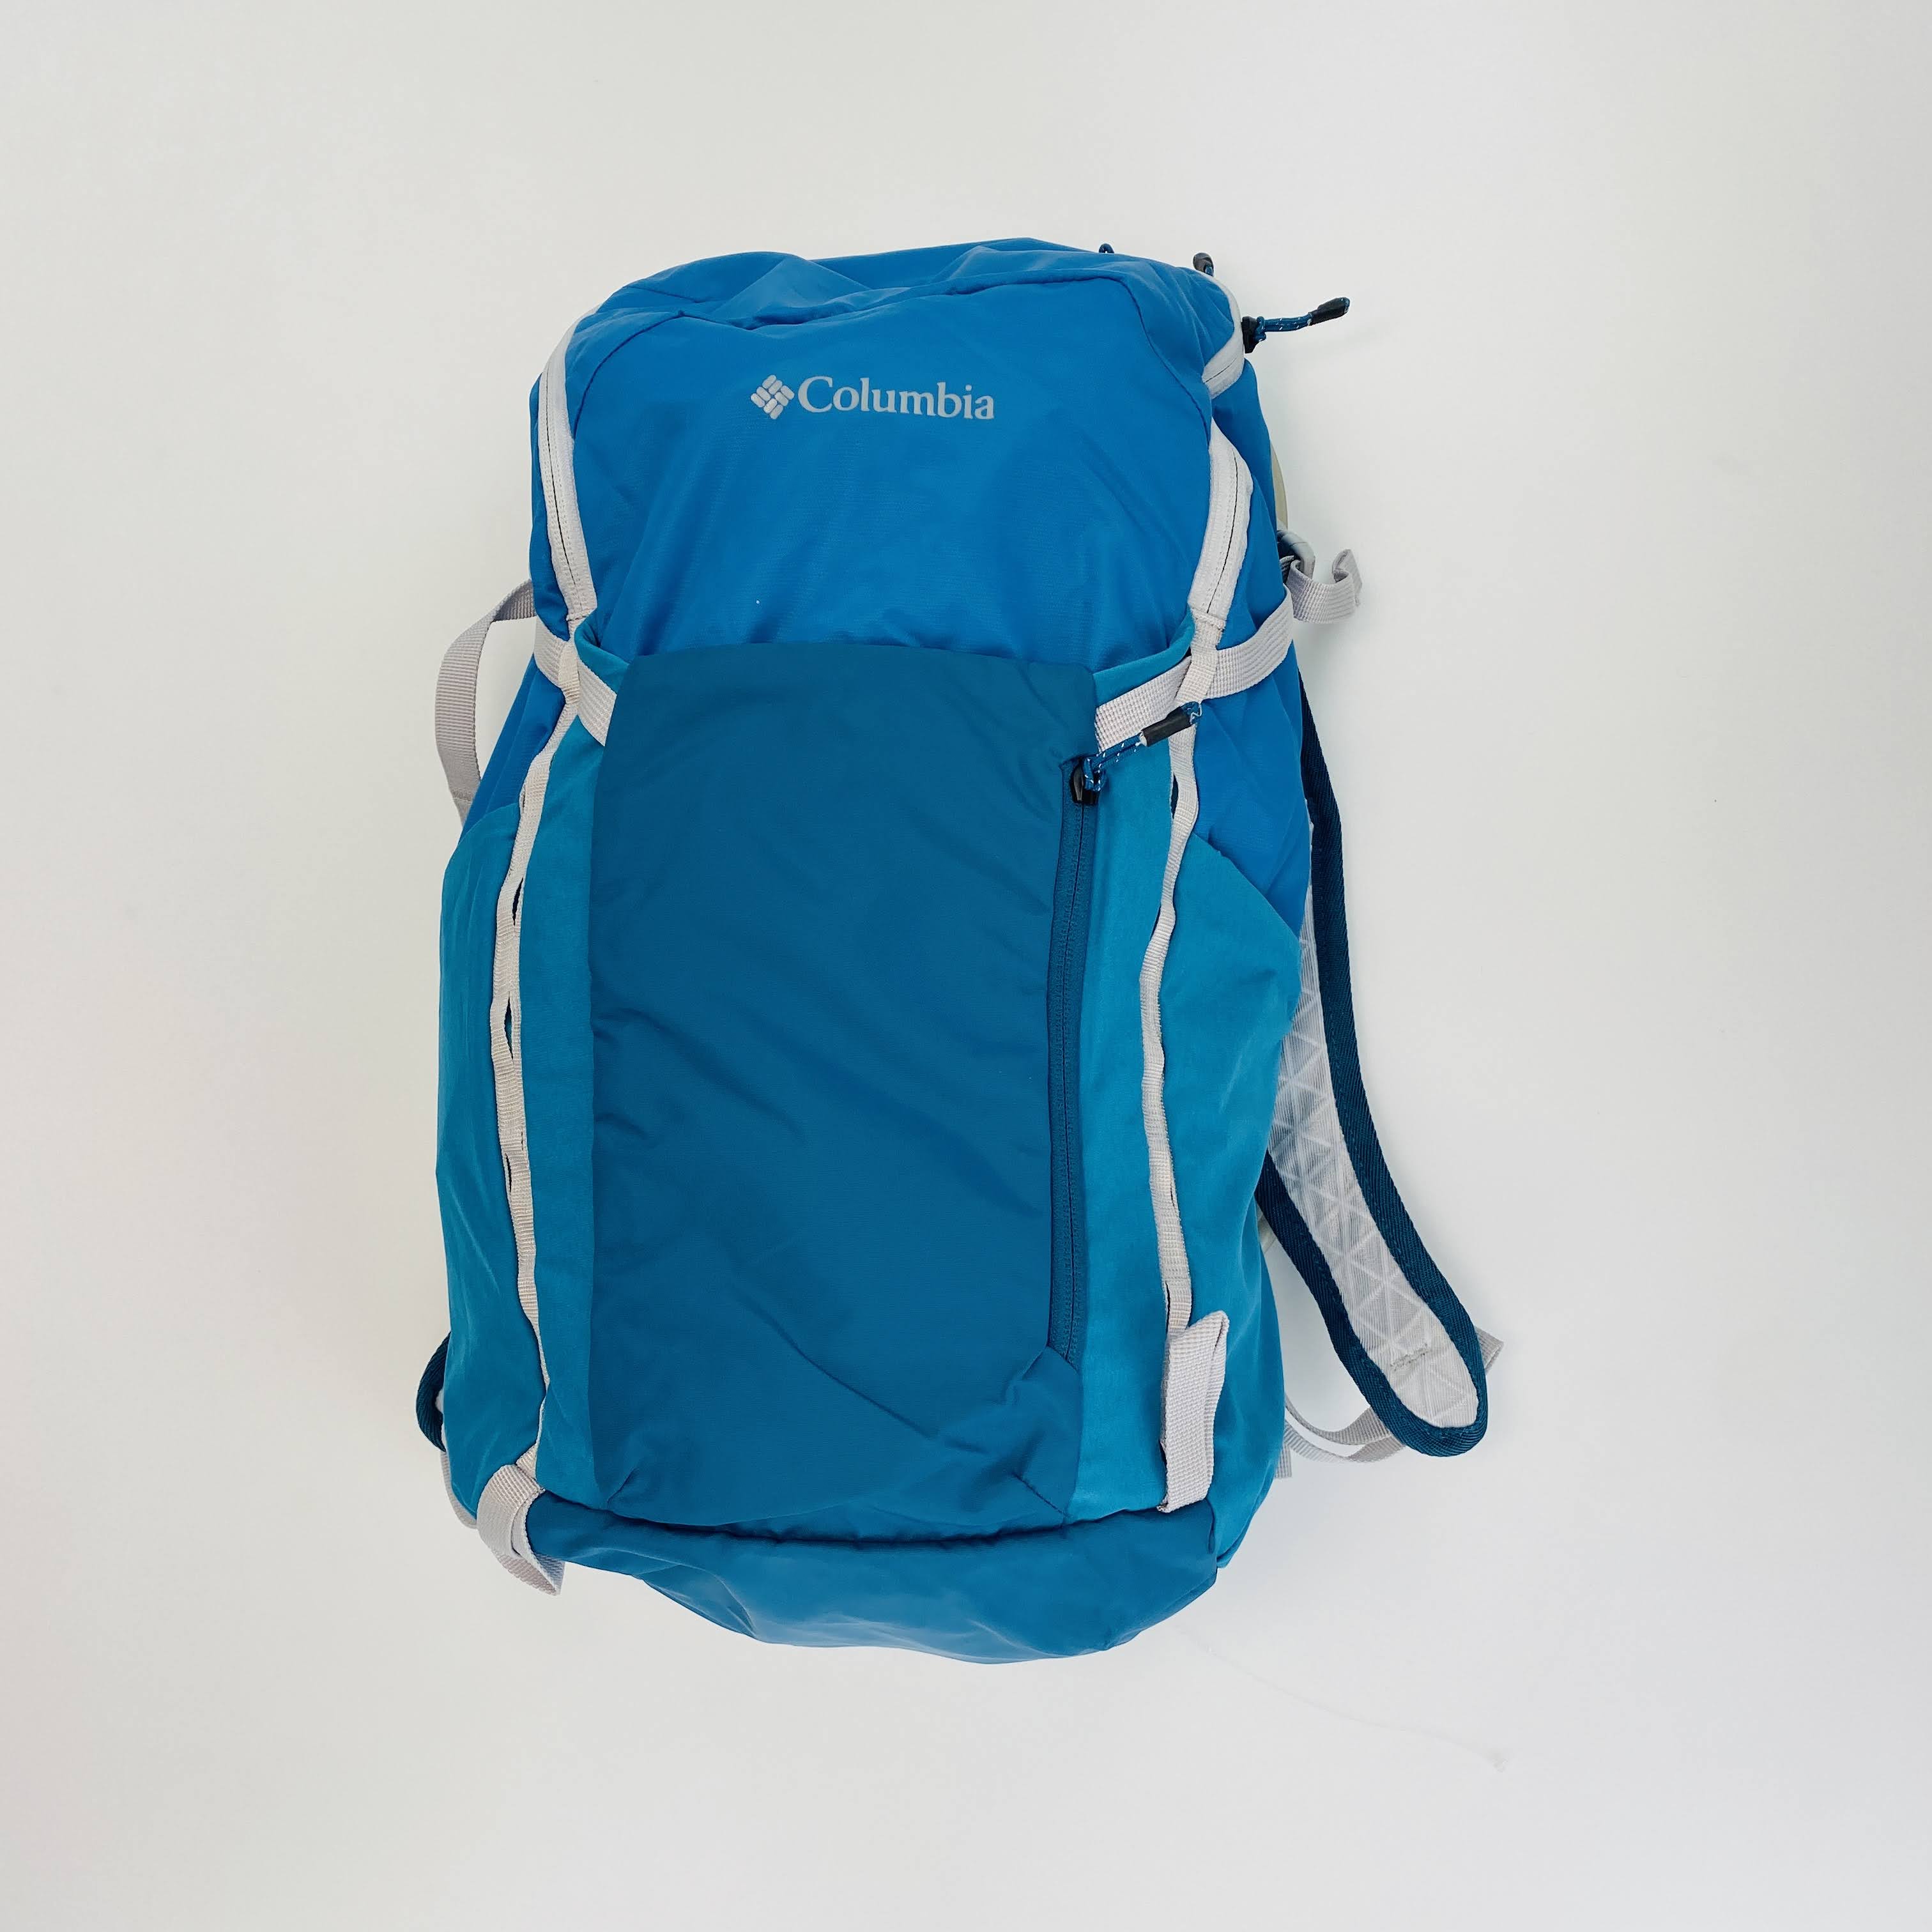 Columbia Maxtrail™ 22L Backpack with Reservoir - Seconde main Sac à dos d'hydratation - Bleu - Taille unique | Hardloop